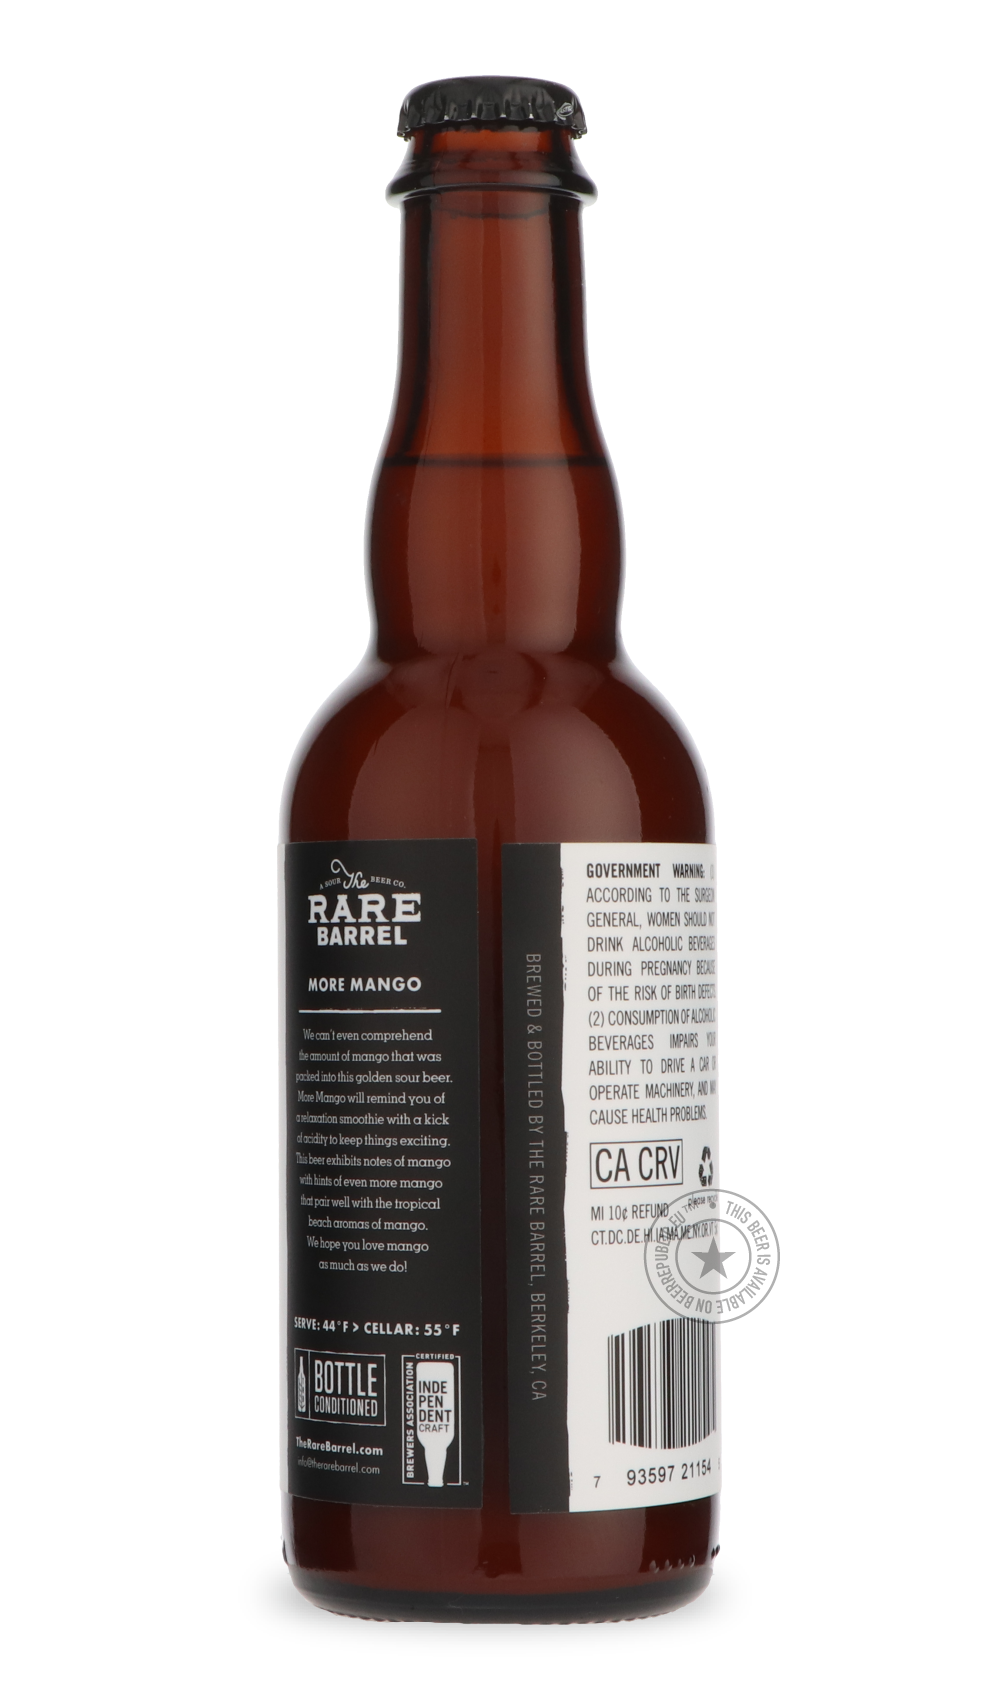 -The Rare Barrel- More Mango 2021-Sour / Wild & Fruity- Only @ Beer Republic - The best online beer store for American & Canadian craft beer - Buy beer online from the USA and Canada - Bier online kopen - Amerikaans bier kopen - Craft beer store - Craft beer kopen - Amerikanisch bier kaufen - Bier online kaufen - Acheter biere online - IPA - Stout - Porter - New England IPA - Hazy IPA - Imperial Stout - Barrel Aged - Barrel Aged Imperial Stout - Brown - Dark beer - Blond - Blonde - Pilsner - Lager - Wheat -